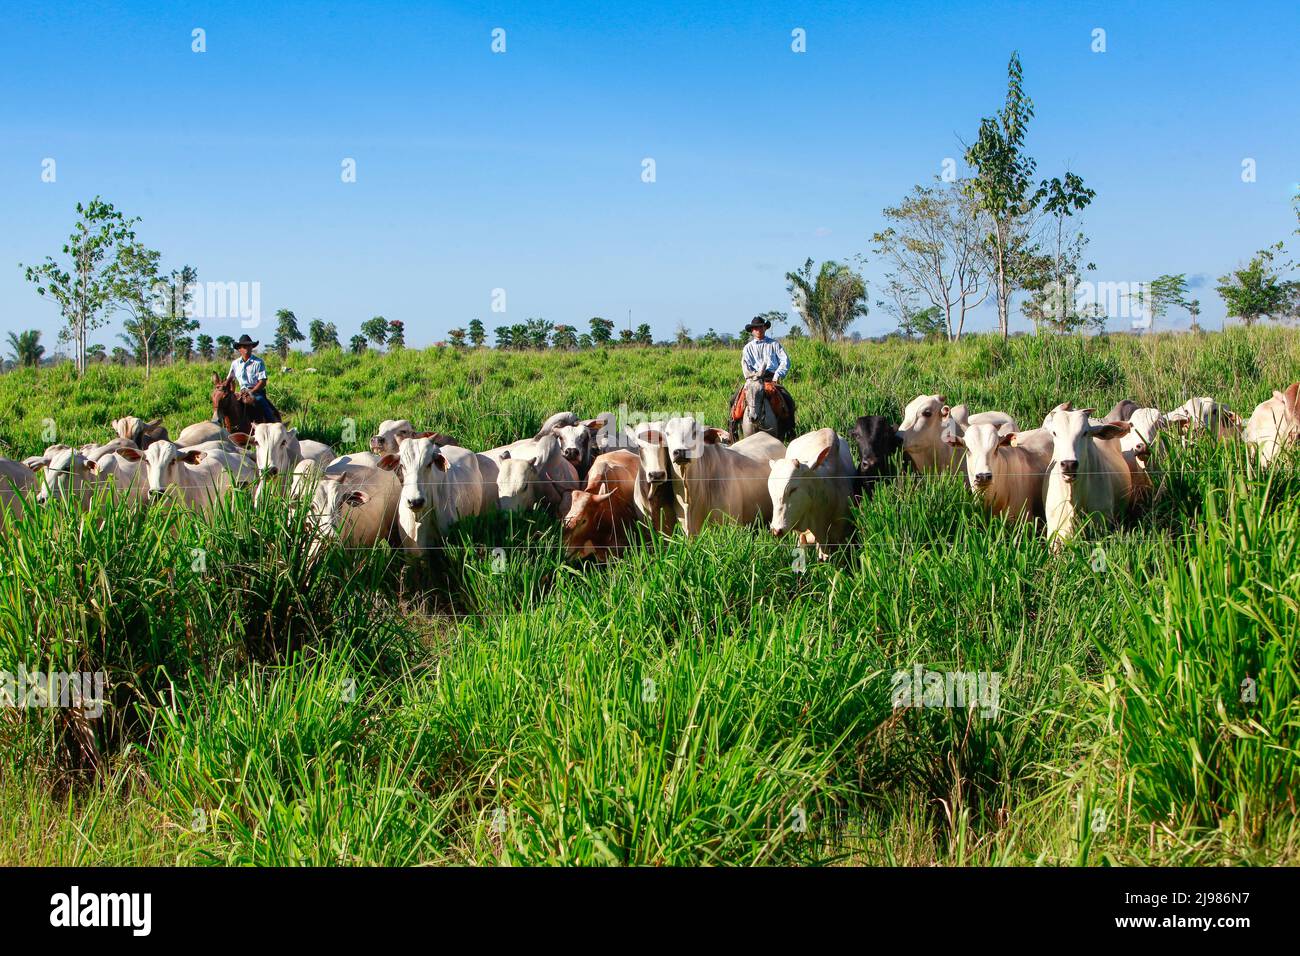 Herd of cattle on pasture, with farmers on the background riding horses on grassland, wearing cowboy hats. Brazil, Pará State, Amazon. Stock Photo